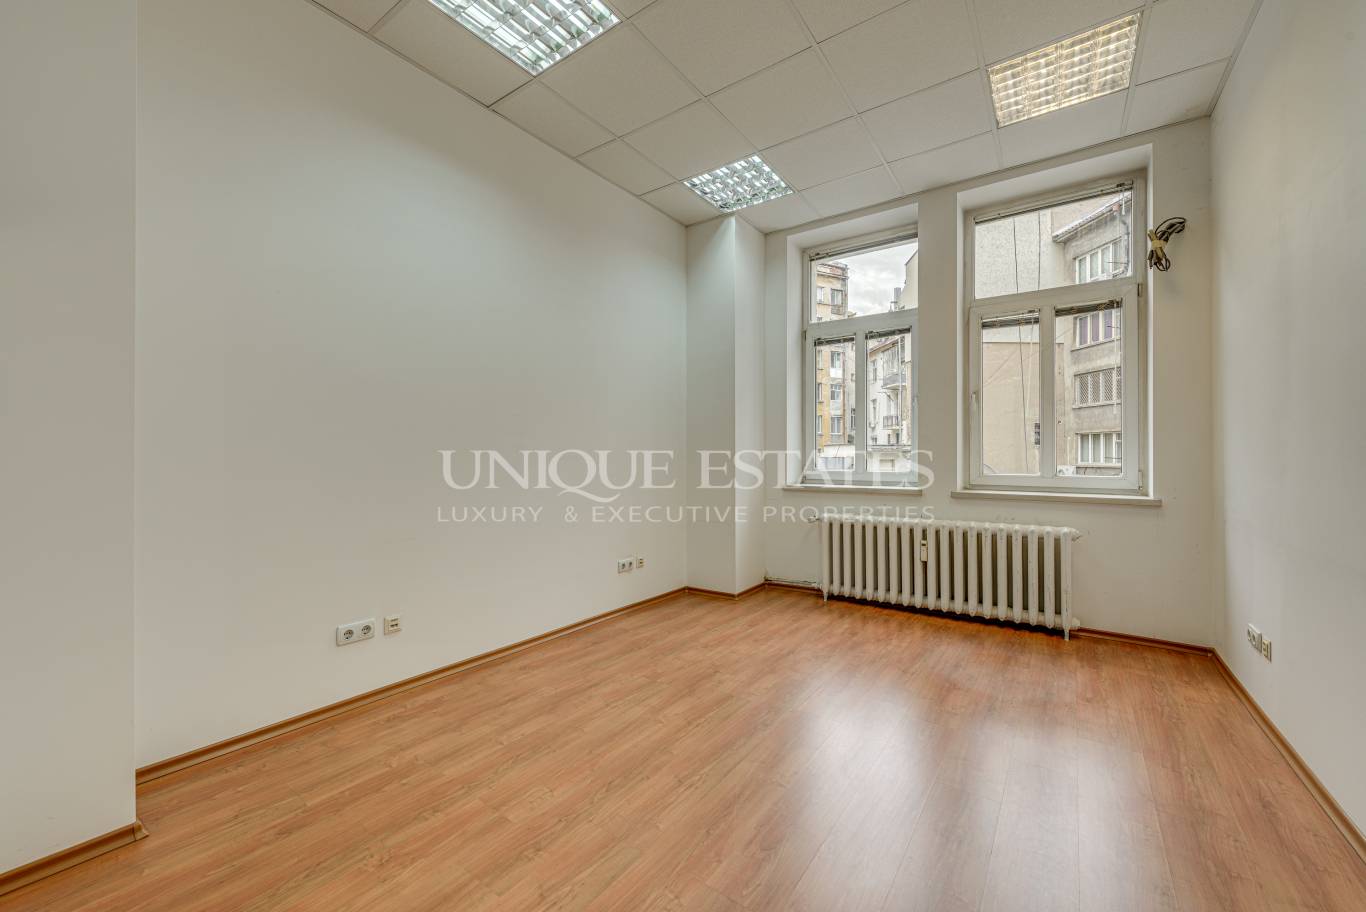 Office for rent in Sofia, Downtown with listing ID: K4831 - image 10